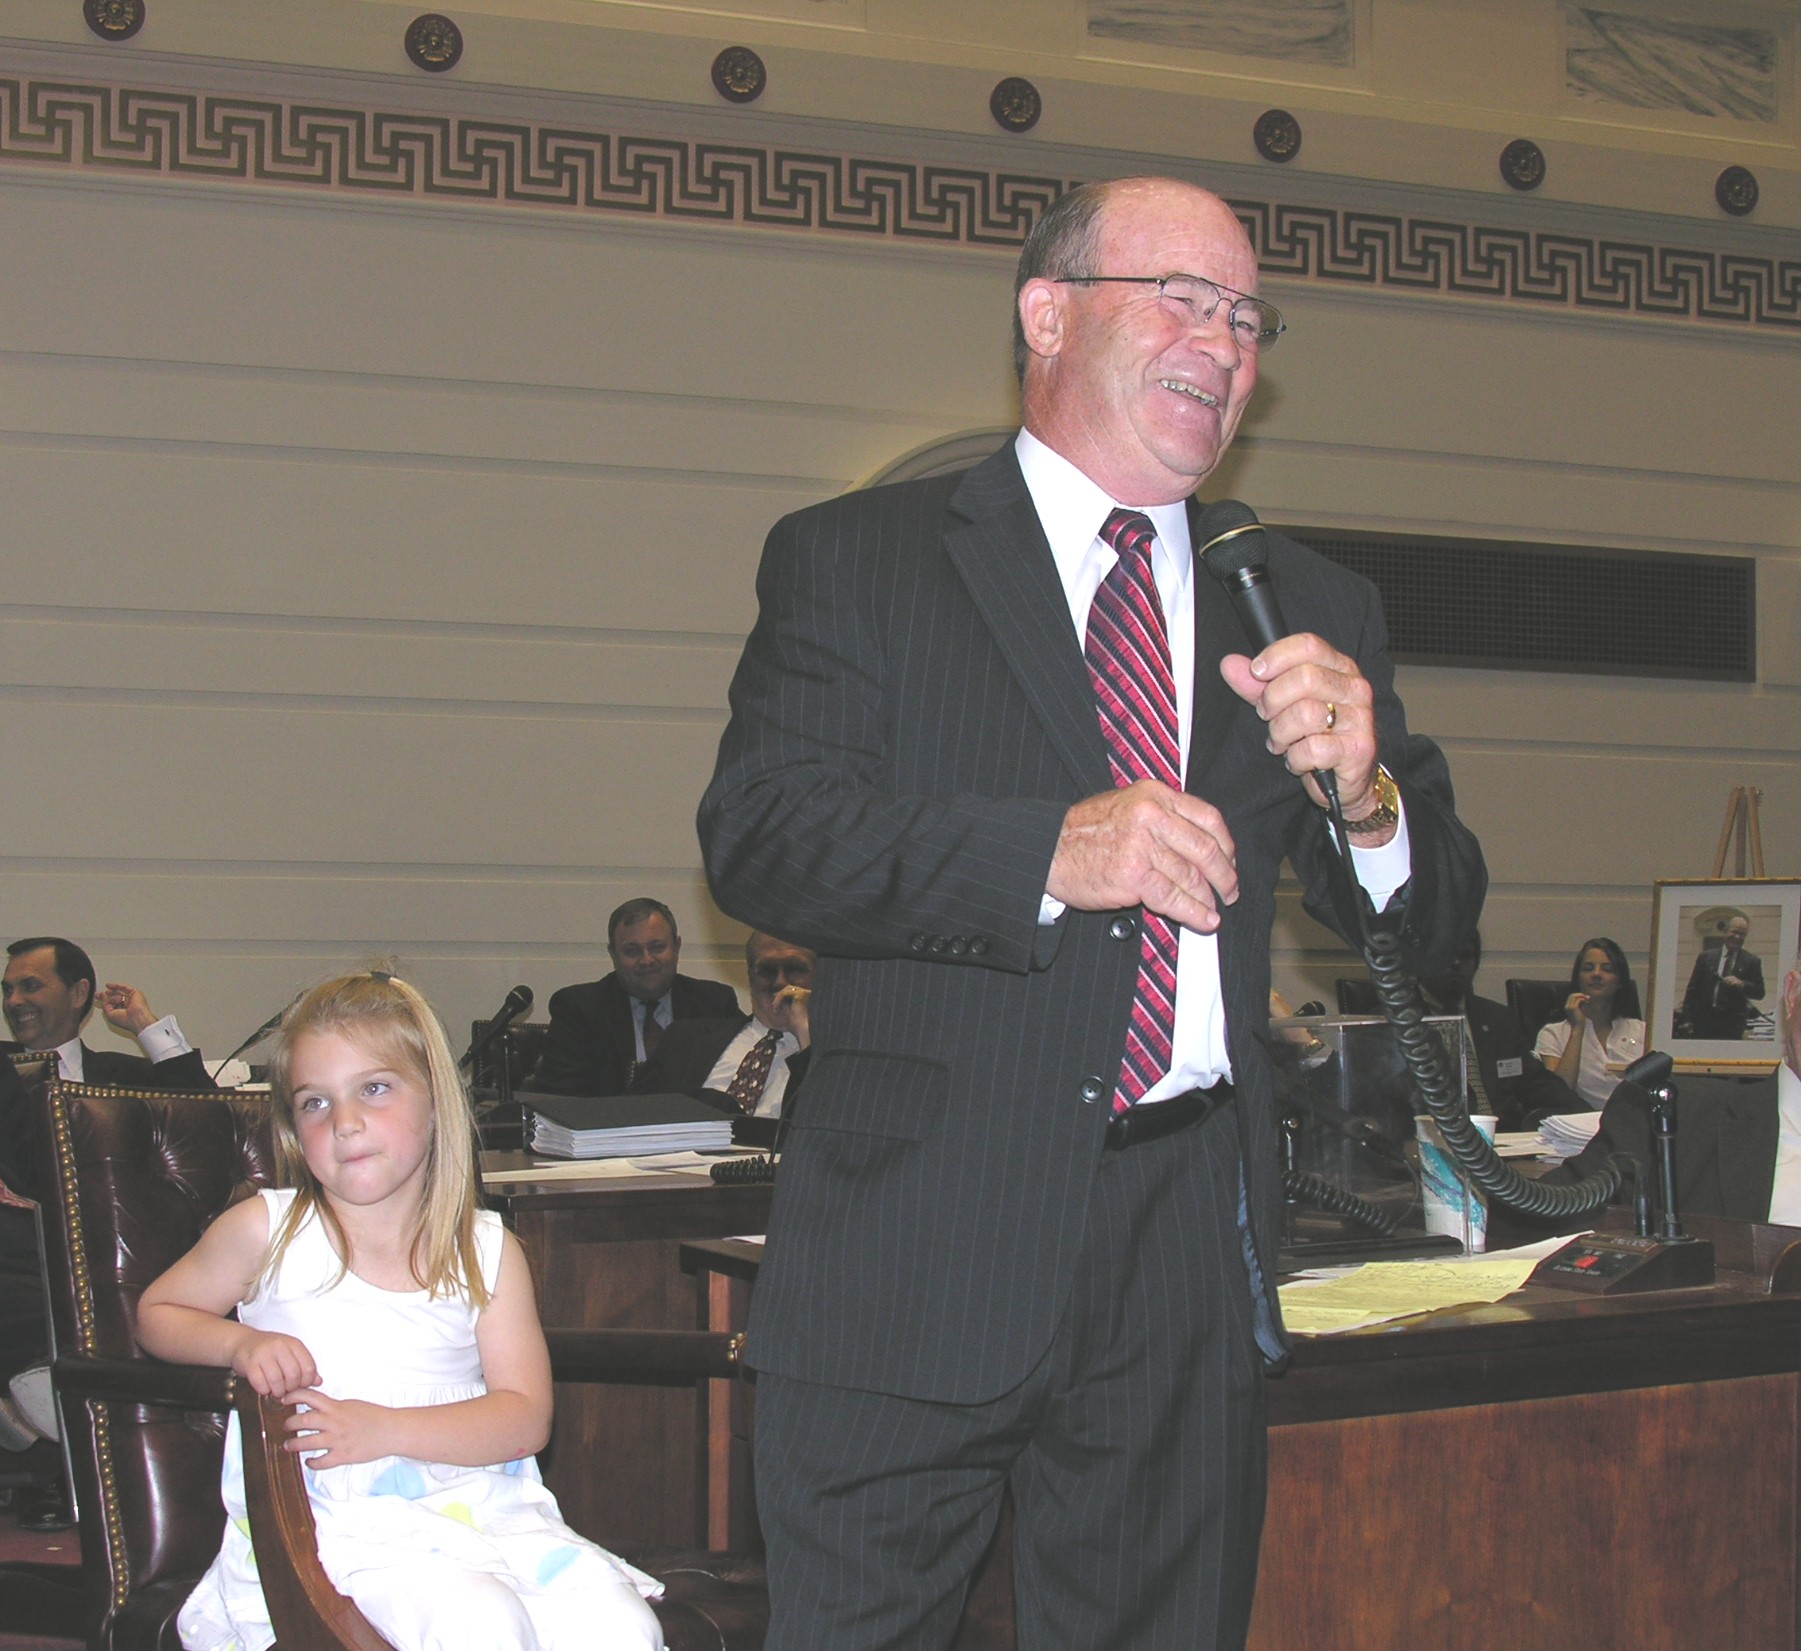 Sen. Frank Shurden was honored by fellow Senators Tuesday as he finishes his final session due to term limits.  